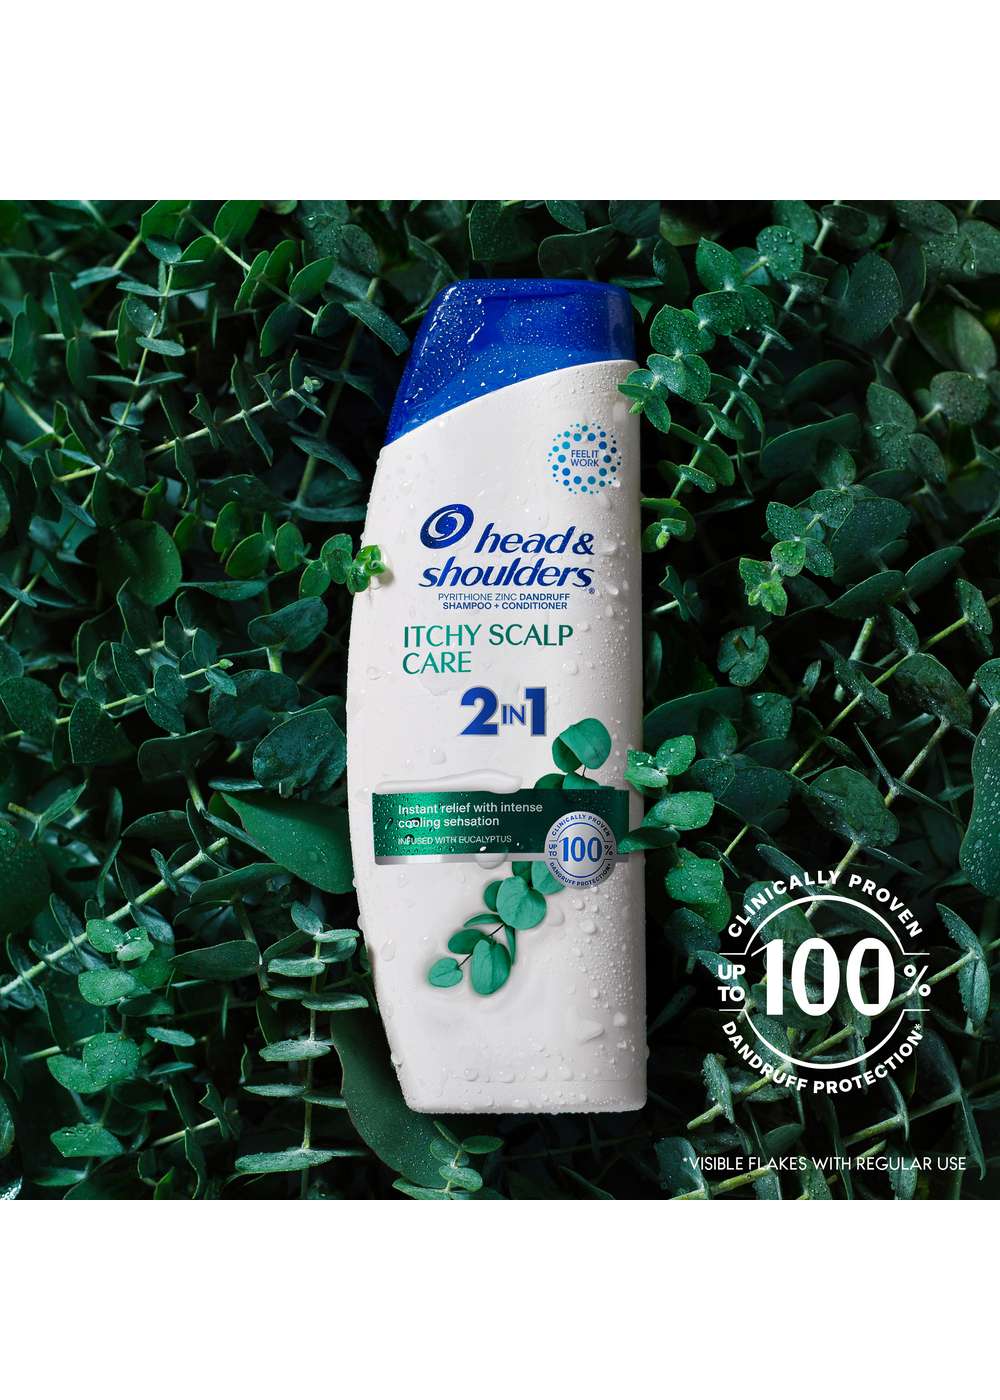 Head & Shoulders Itchy Scalp Care 2in1 Dandruff Shampoo & Conditioner ; image 10 of 11